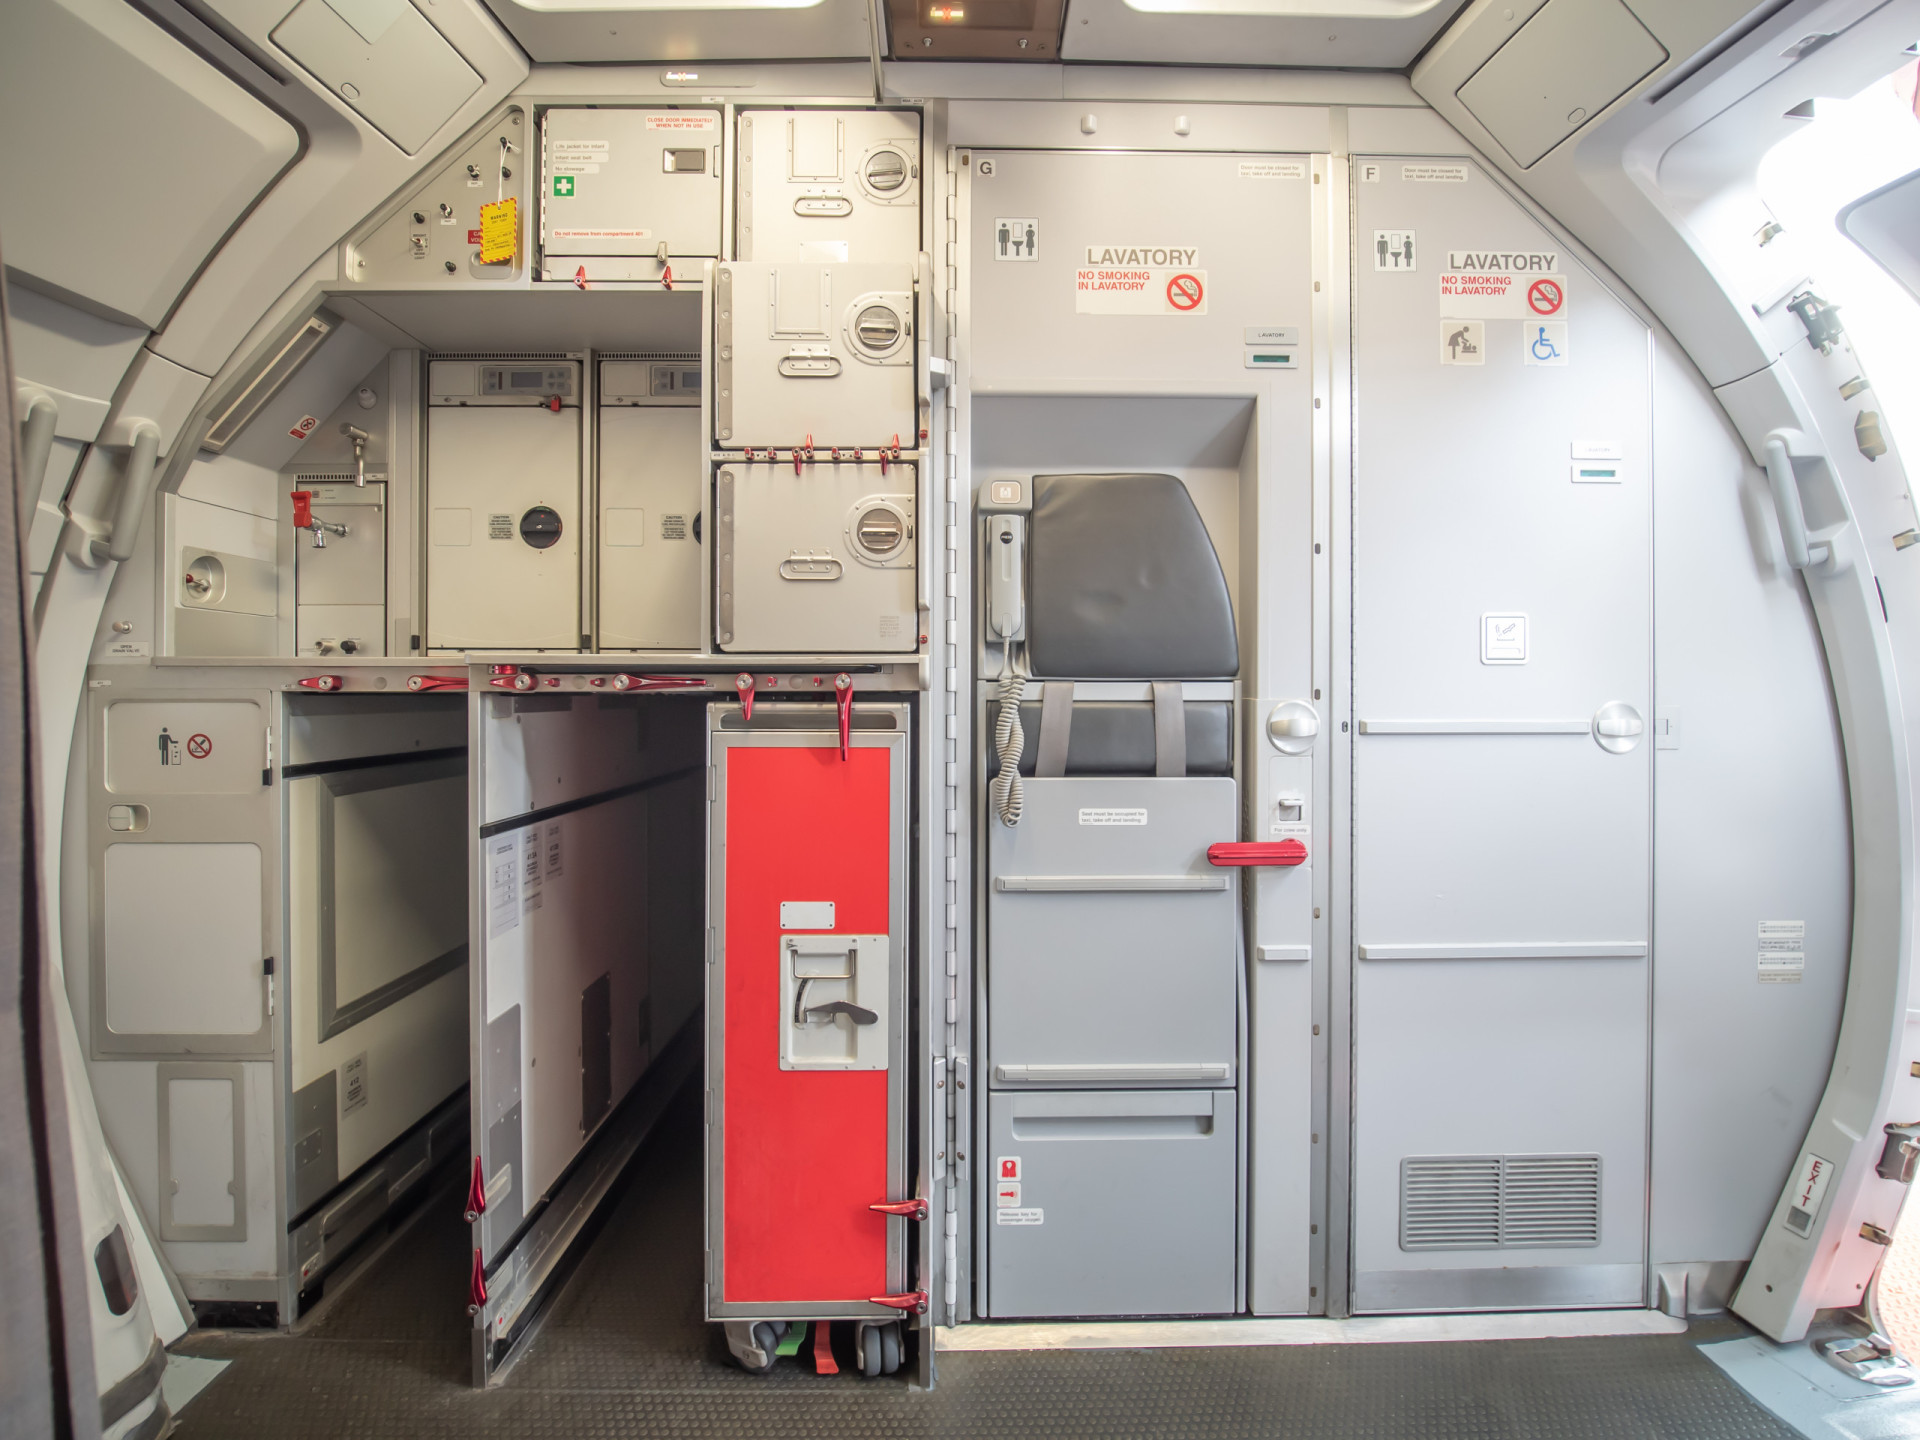 <p>The galley is the aircraft's small kitchen, where flight attendants prepare food, snacks, and beverages.</p><p><a href="https://www.msn.com/en-us/community/channel/vid-7xx8mnucu55yw63we9va2gwr7uihbxwc68fxqp25x6tg4ftibpra?cvid=94631541bc0f4f89bfd59158d696ad7e">Follow us and access great exclusive content every day</a></p>